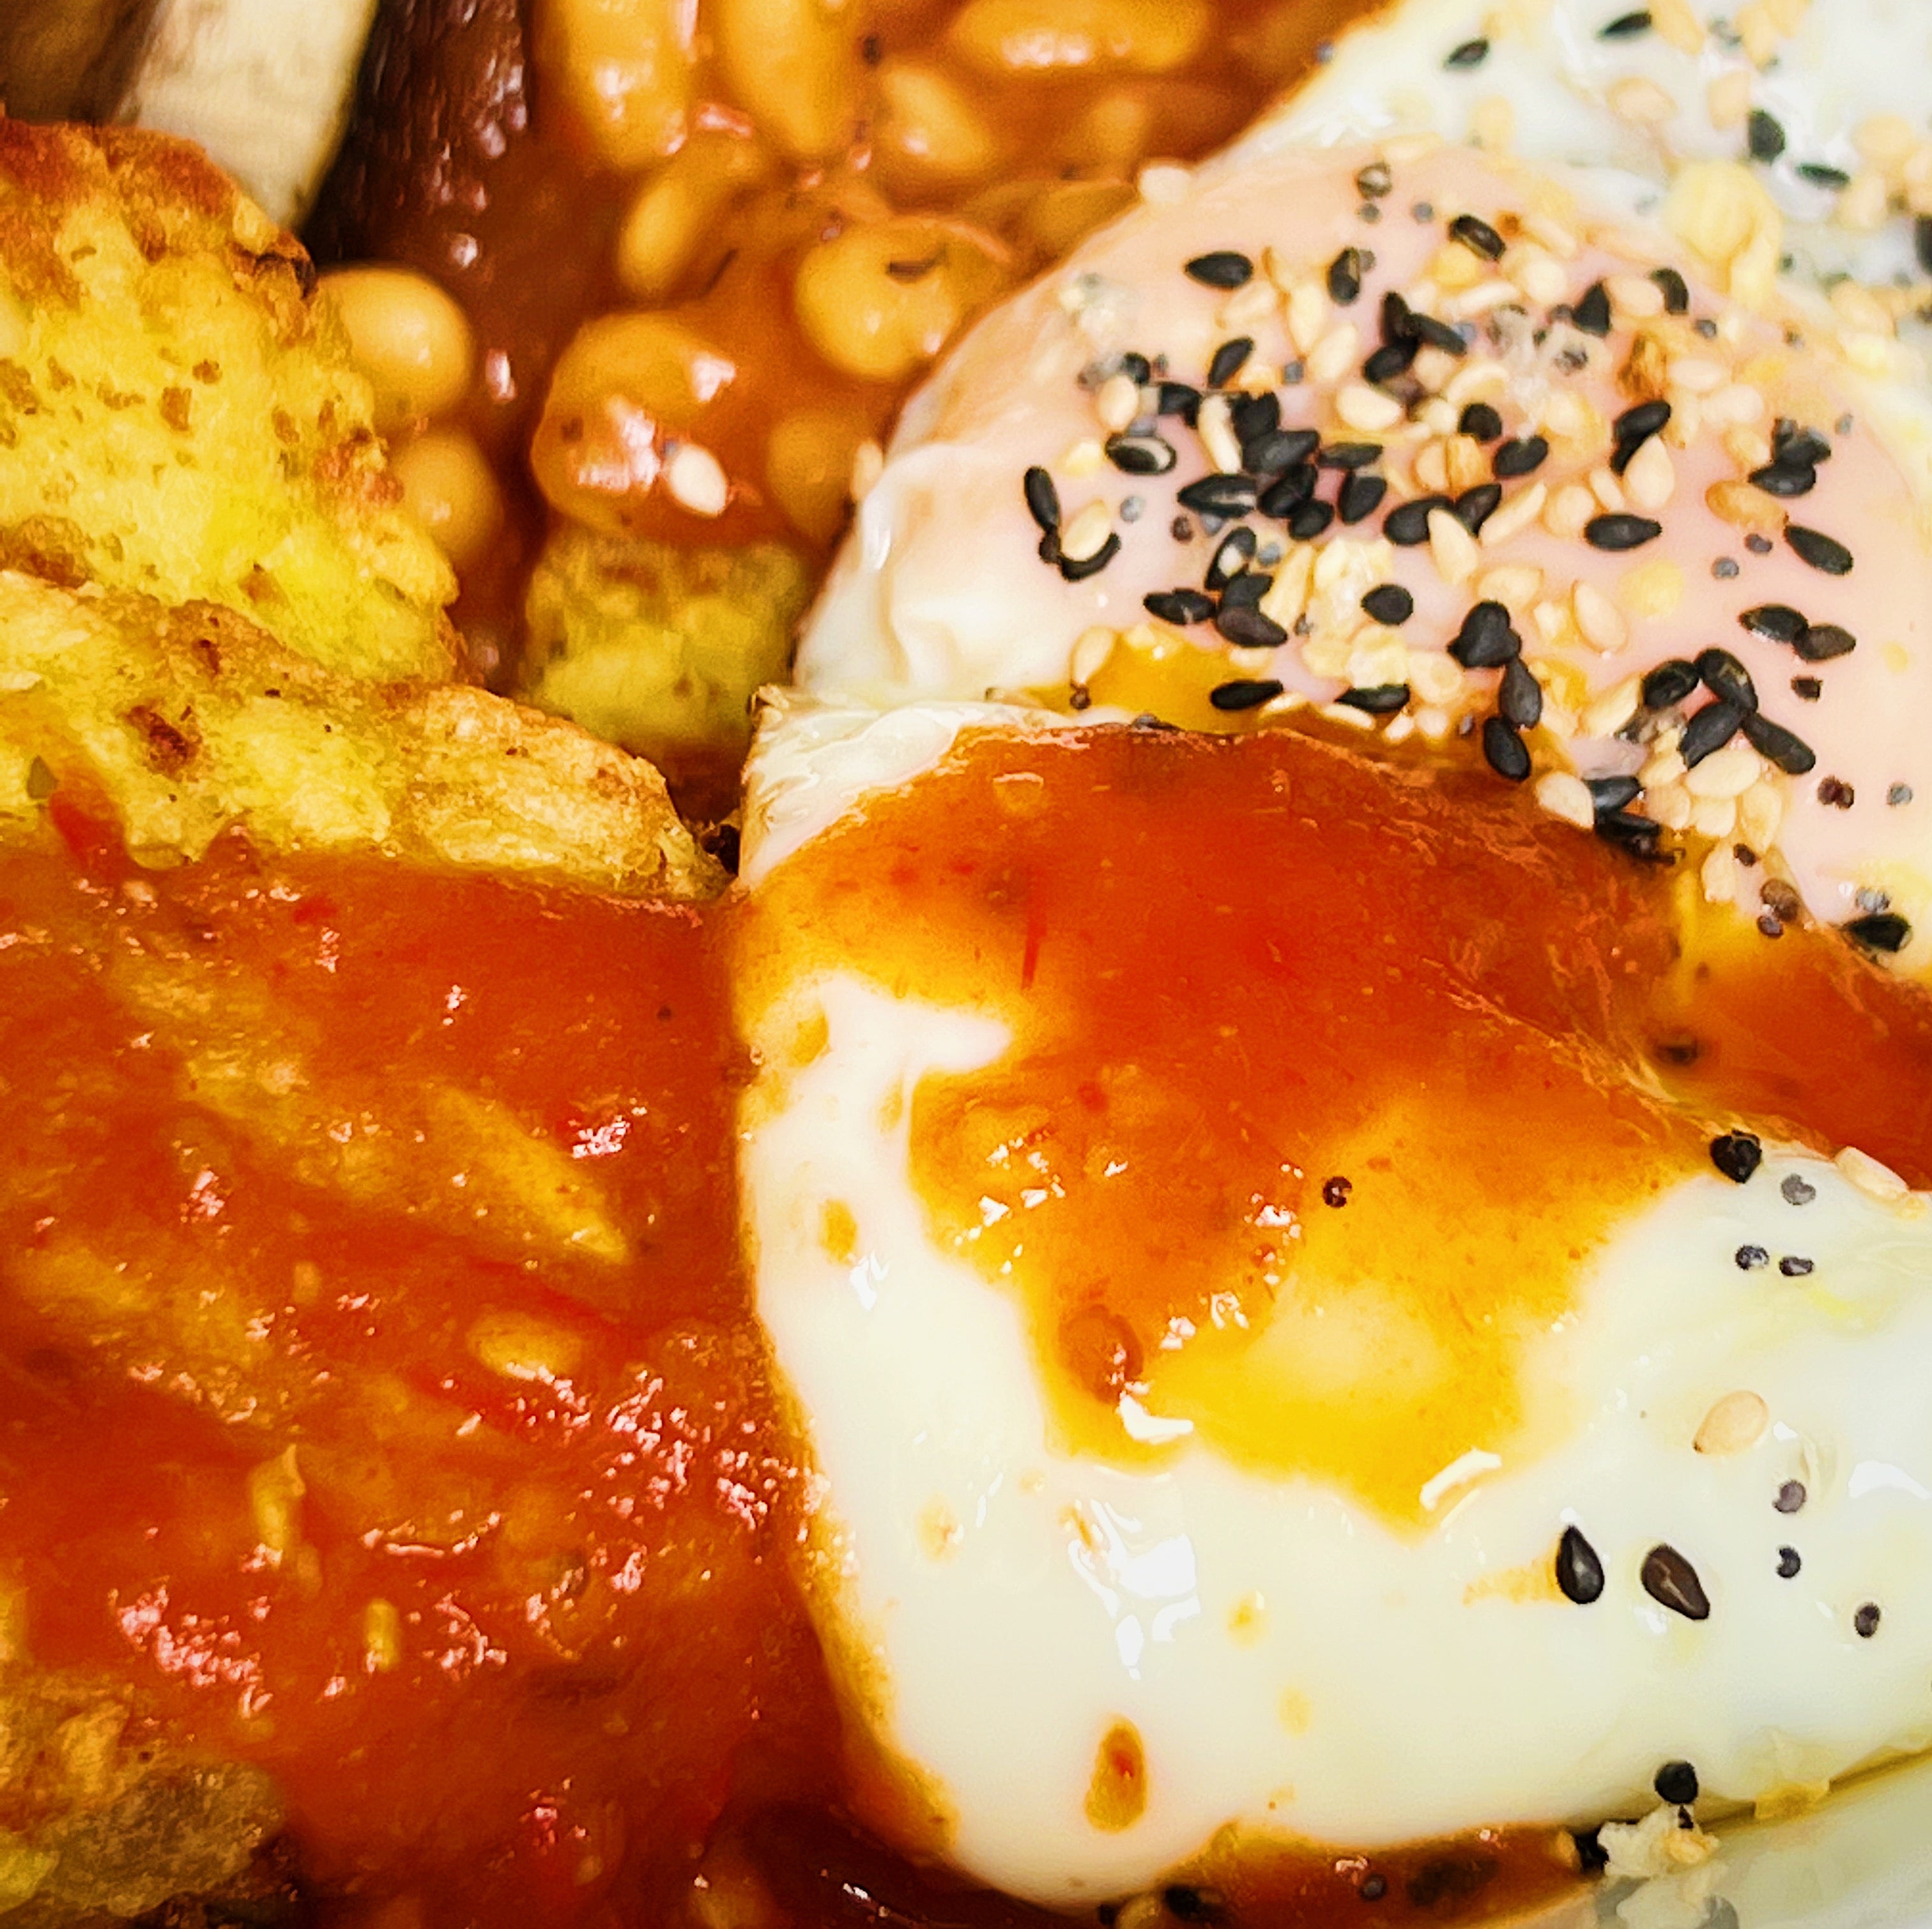 Our three best breakfast condiments